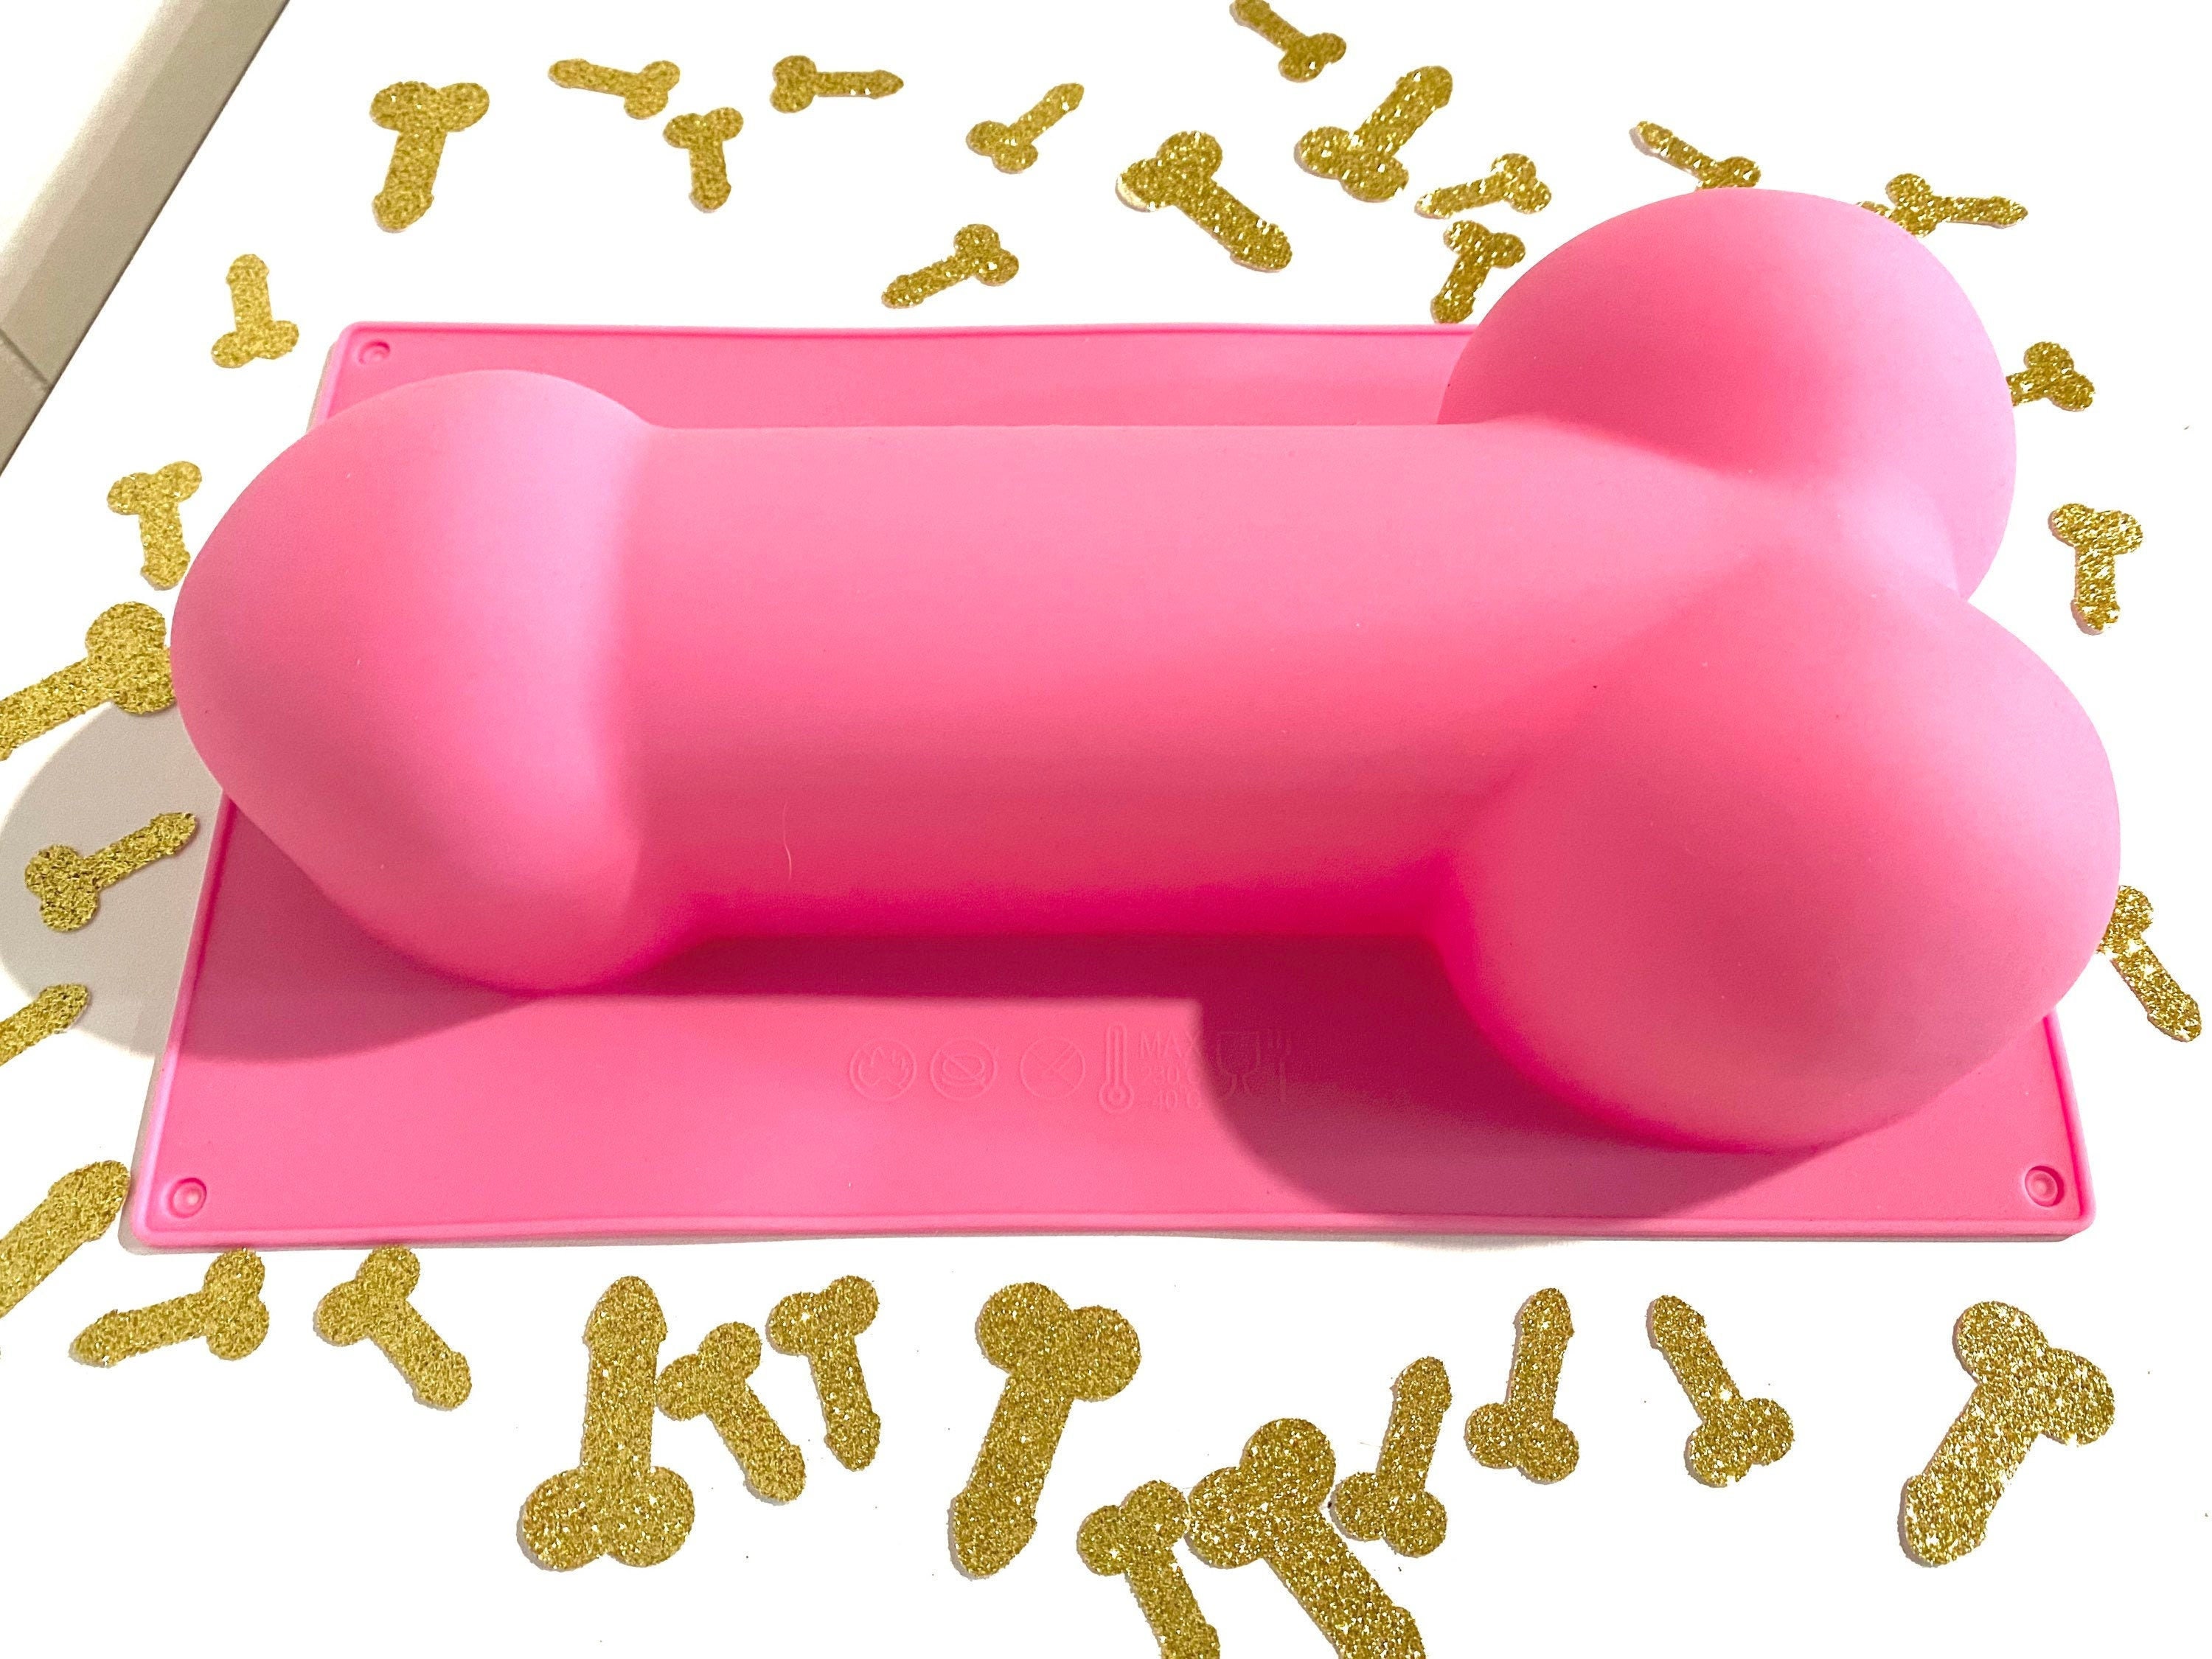 Penis Mold – BakeUp Supply Co.